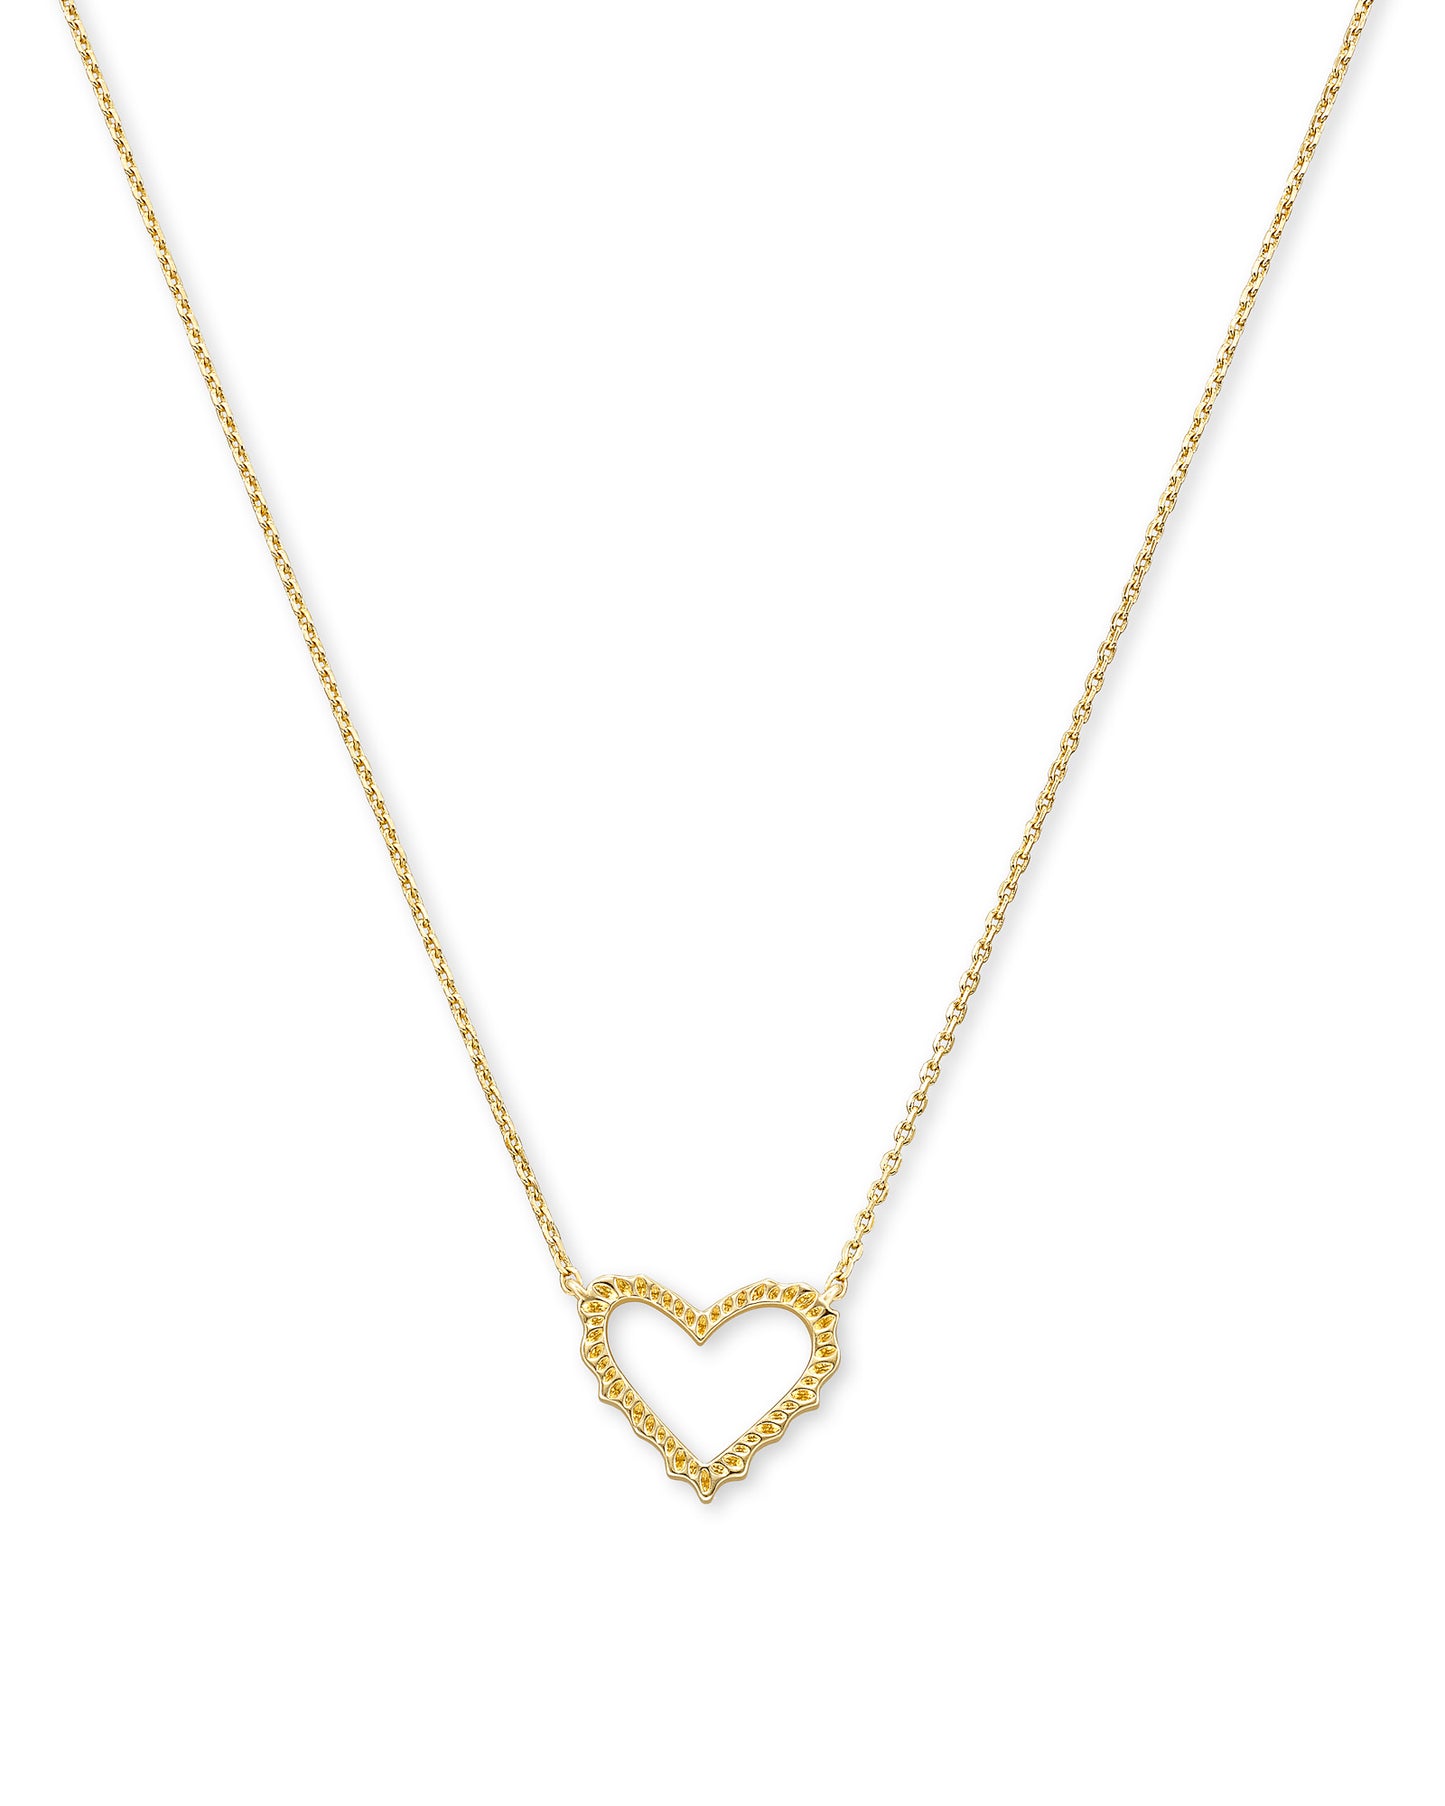 Sophee Heart Small Pendant Necklace Gold